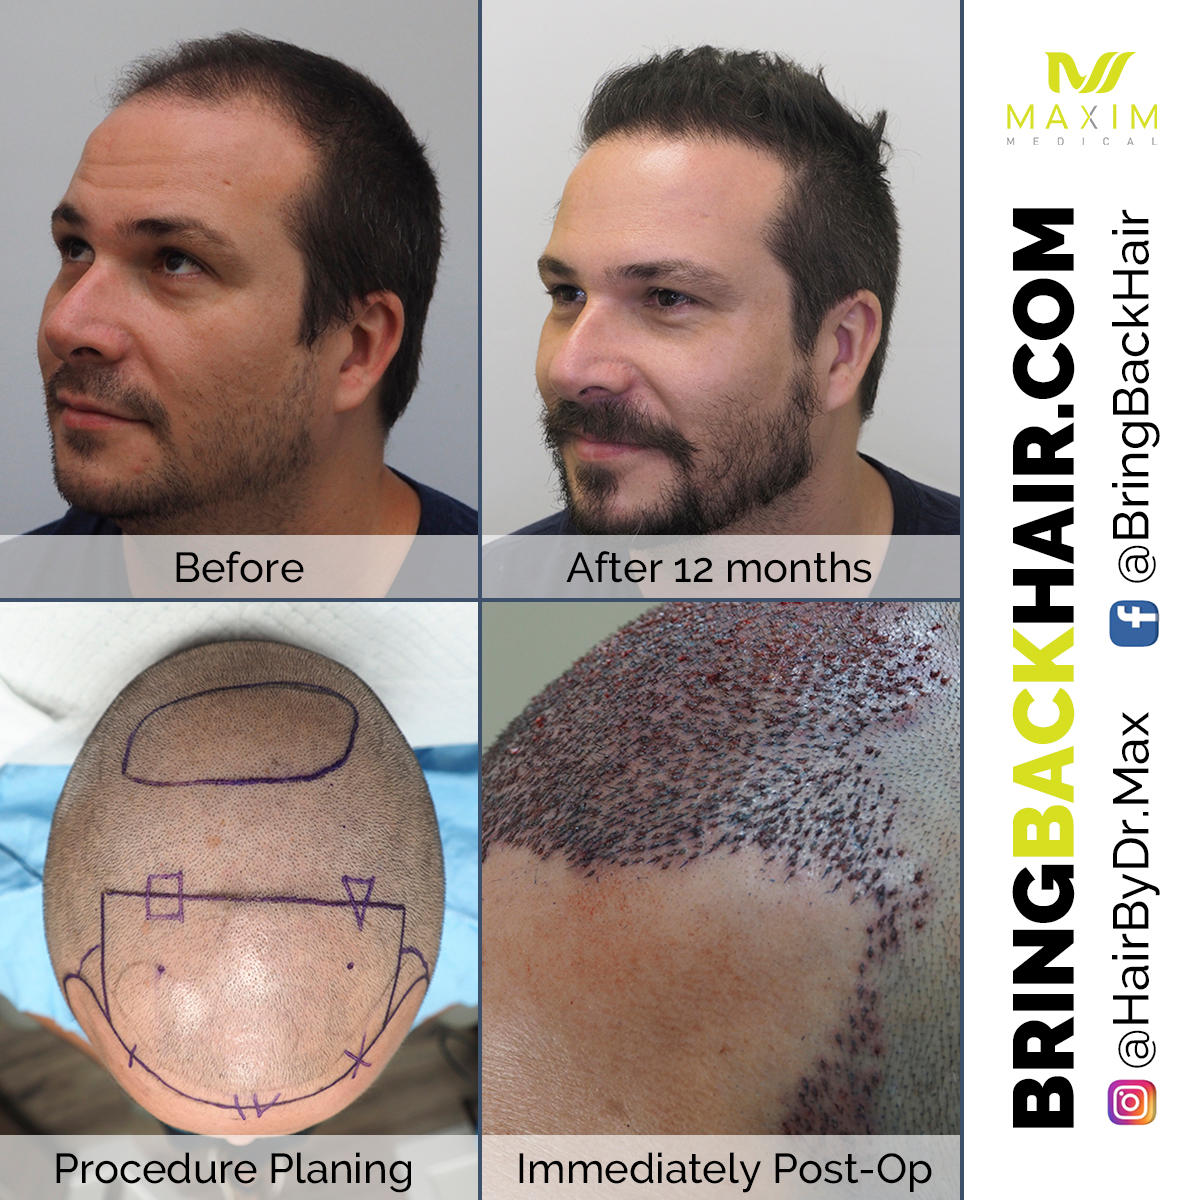 See the step by step process of Pedro’s hair restoration procedure using ARTAS Robotics. Make your dreams come true and achieve these similar outcomes with ARTAS robotic technology!